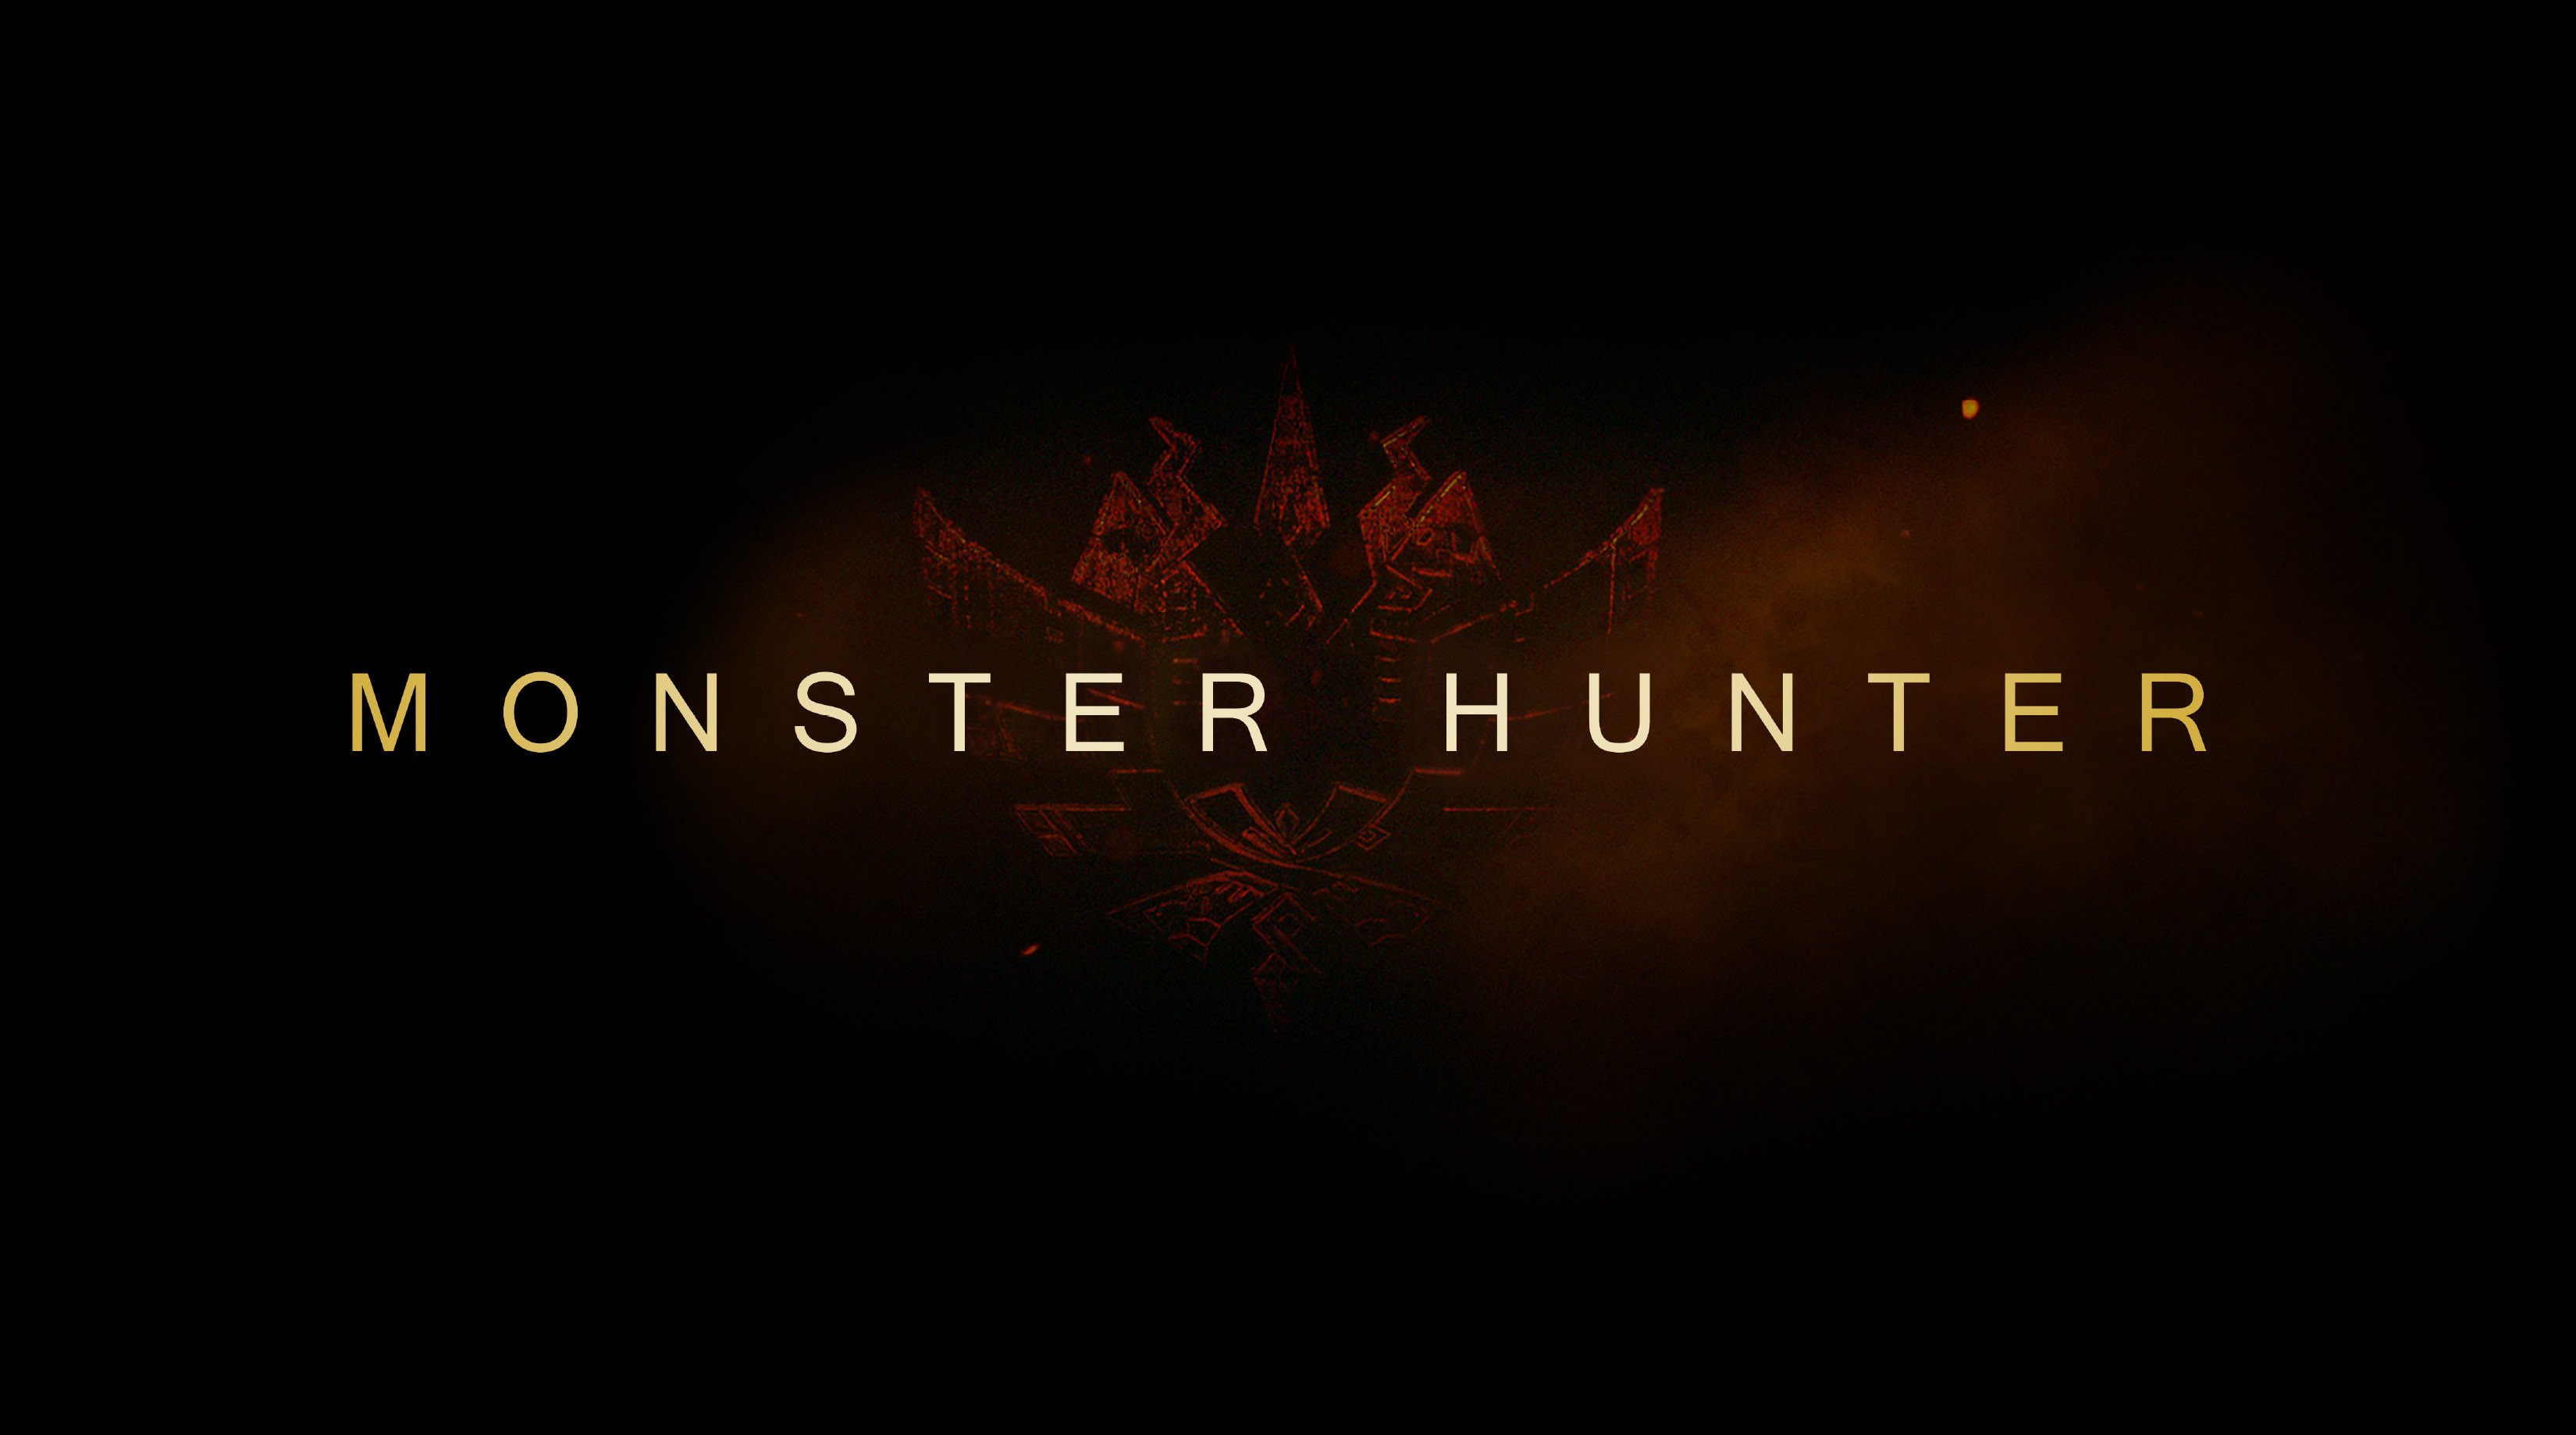 Monster Hunter’s live-action movie isn’t looking very faithful